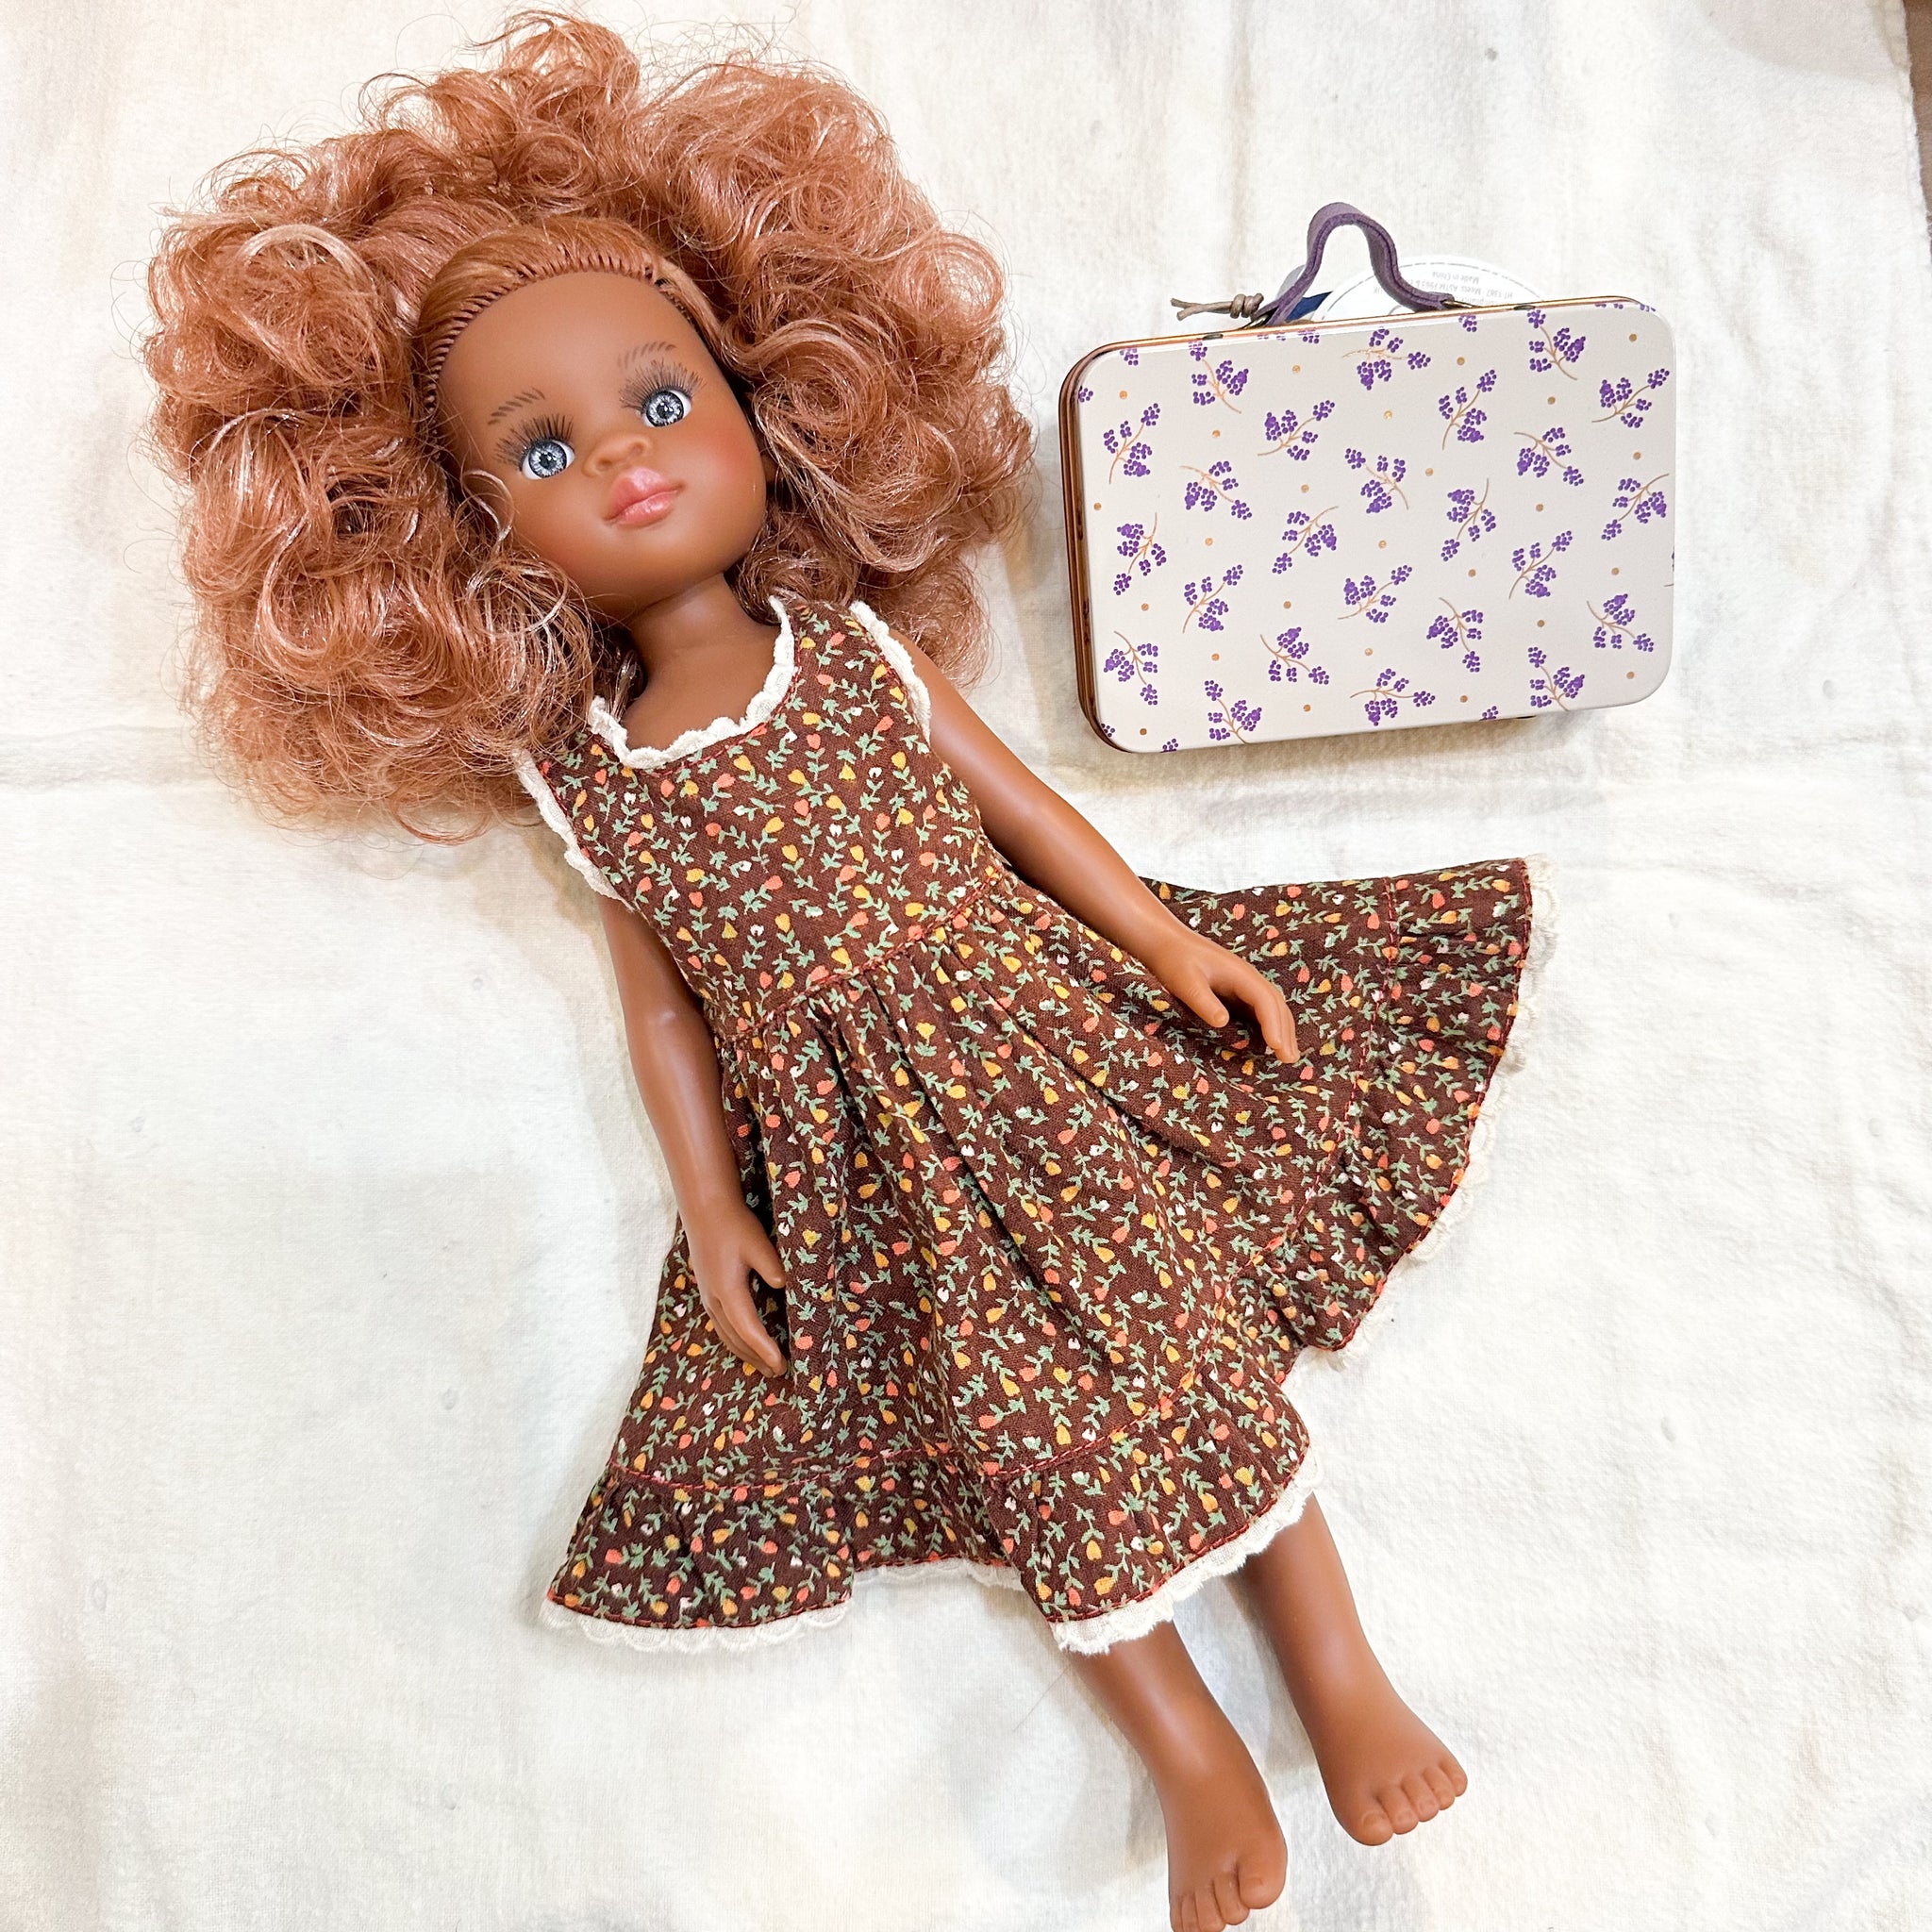 Vintage 1960s Calico Doll Dress (fits Amigas doll)